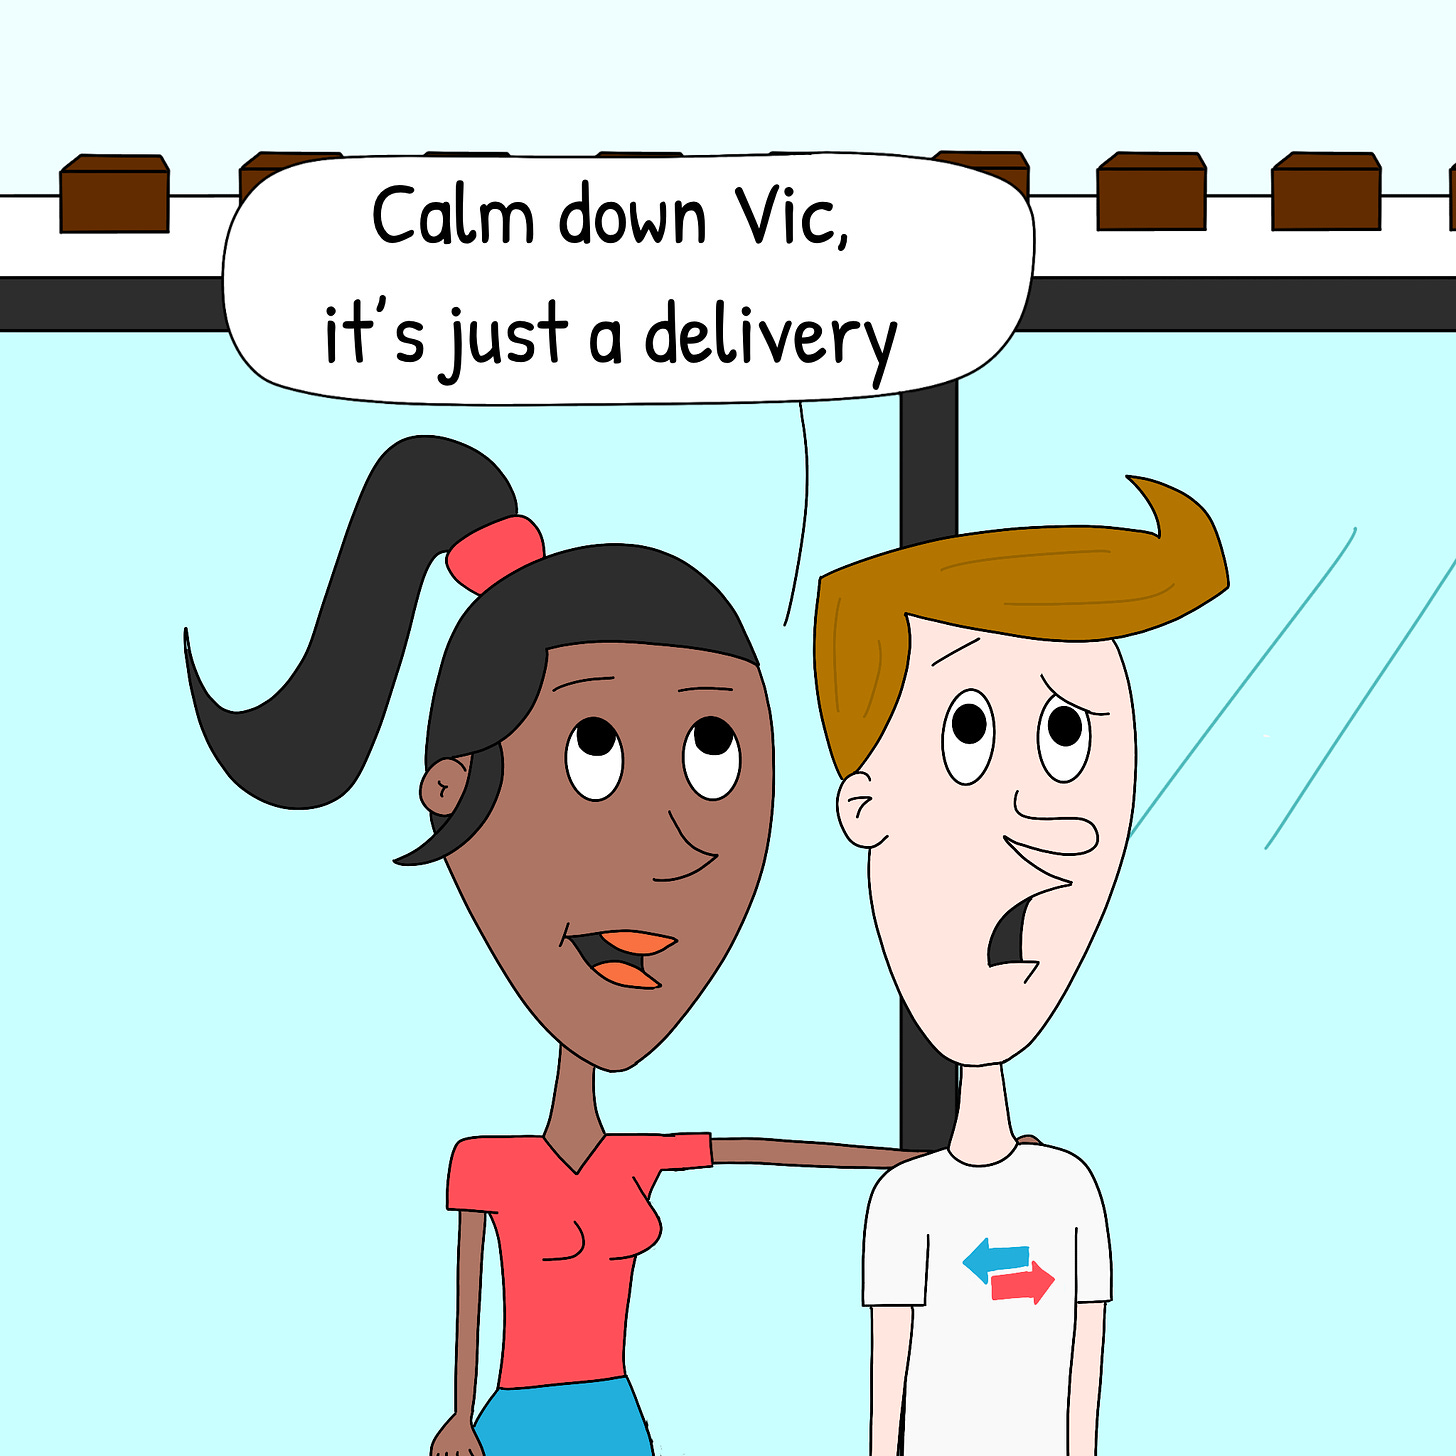 Panel 3: Tori puts her arm around Vic to reassure him and says: "Calm down Vic, it's just a delivery". Vic looks visibly confused. 